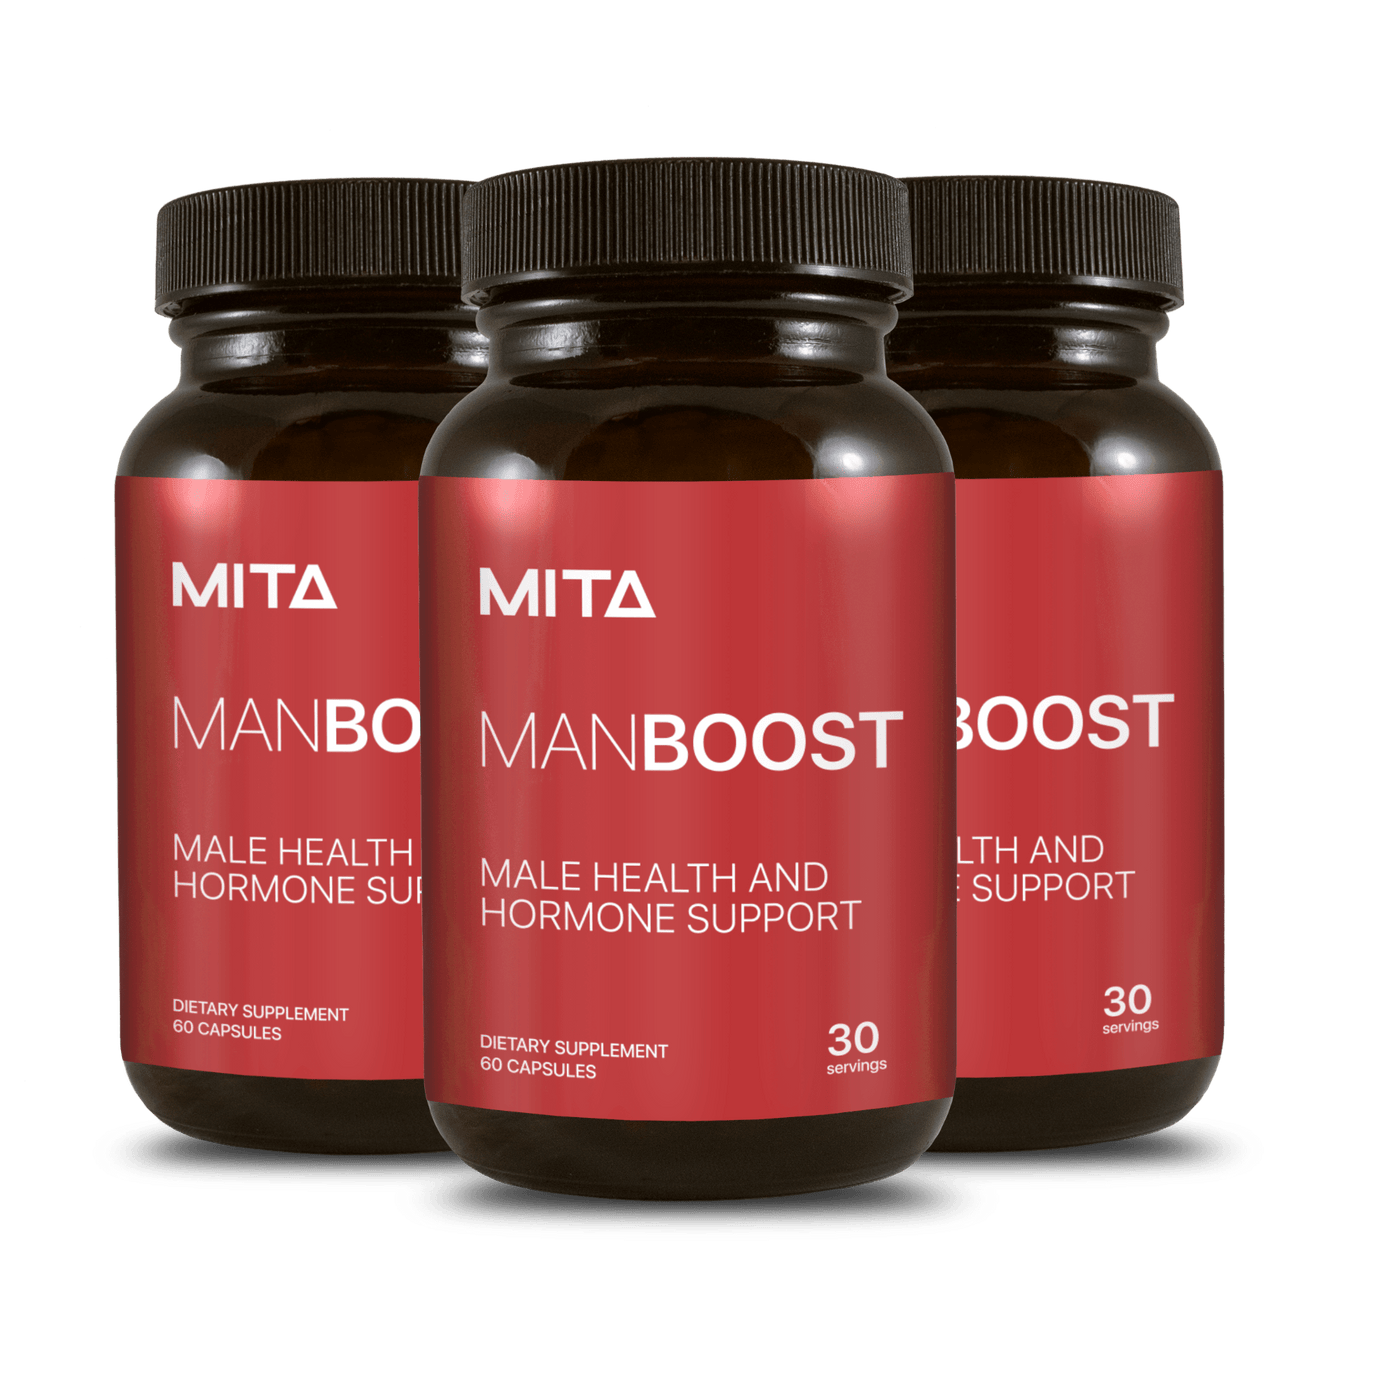 3 Bottles of Man Boost (One-time Offer)